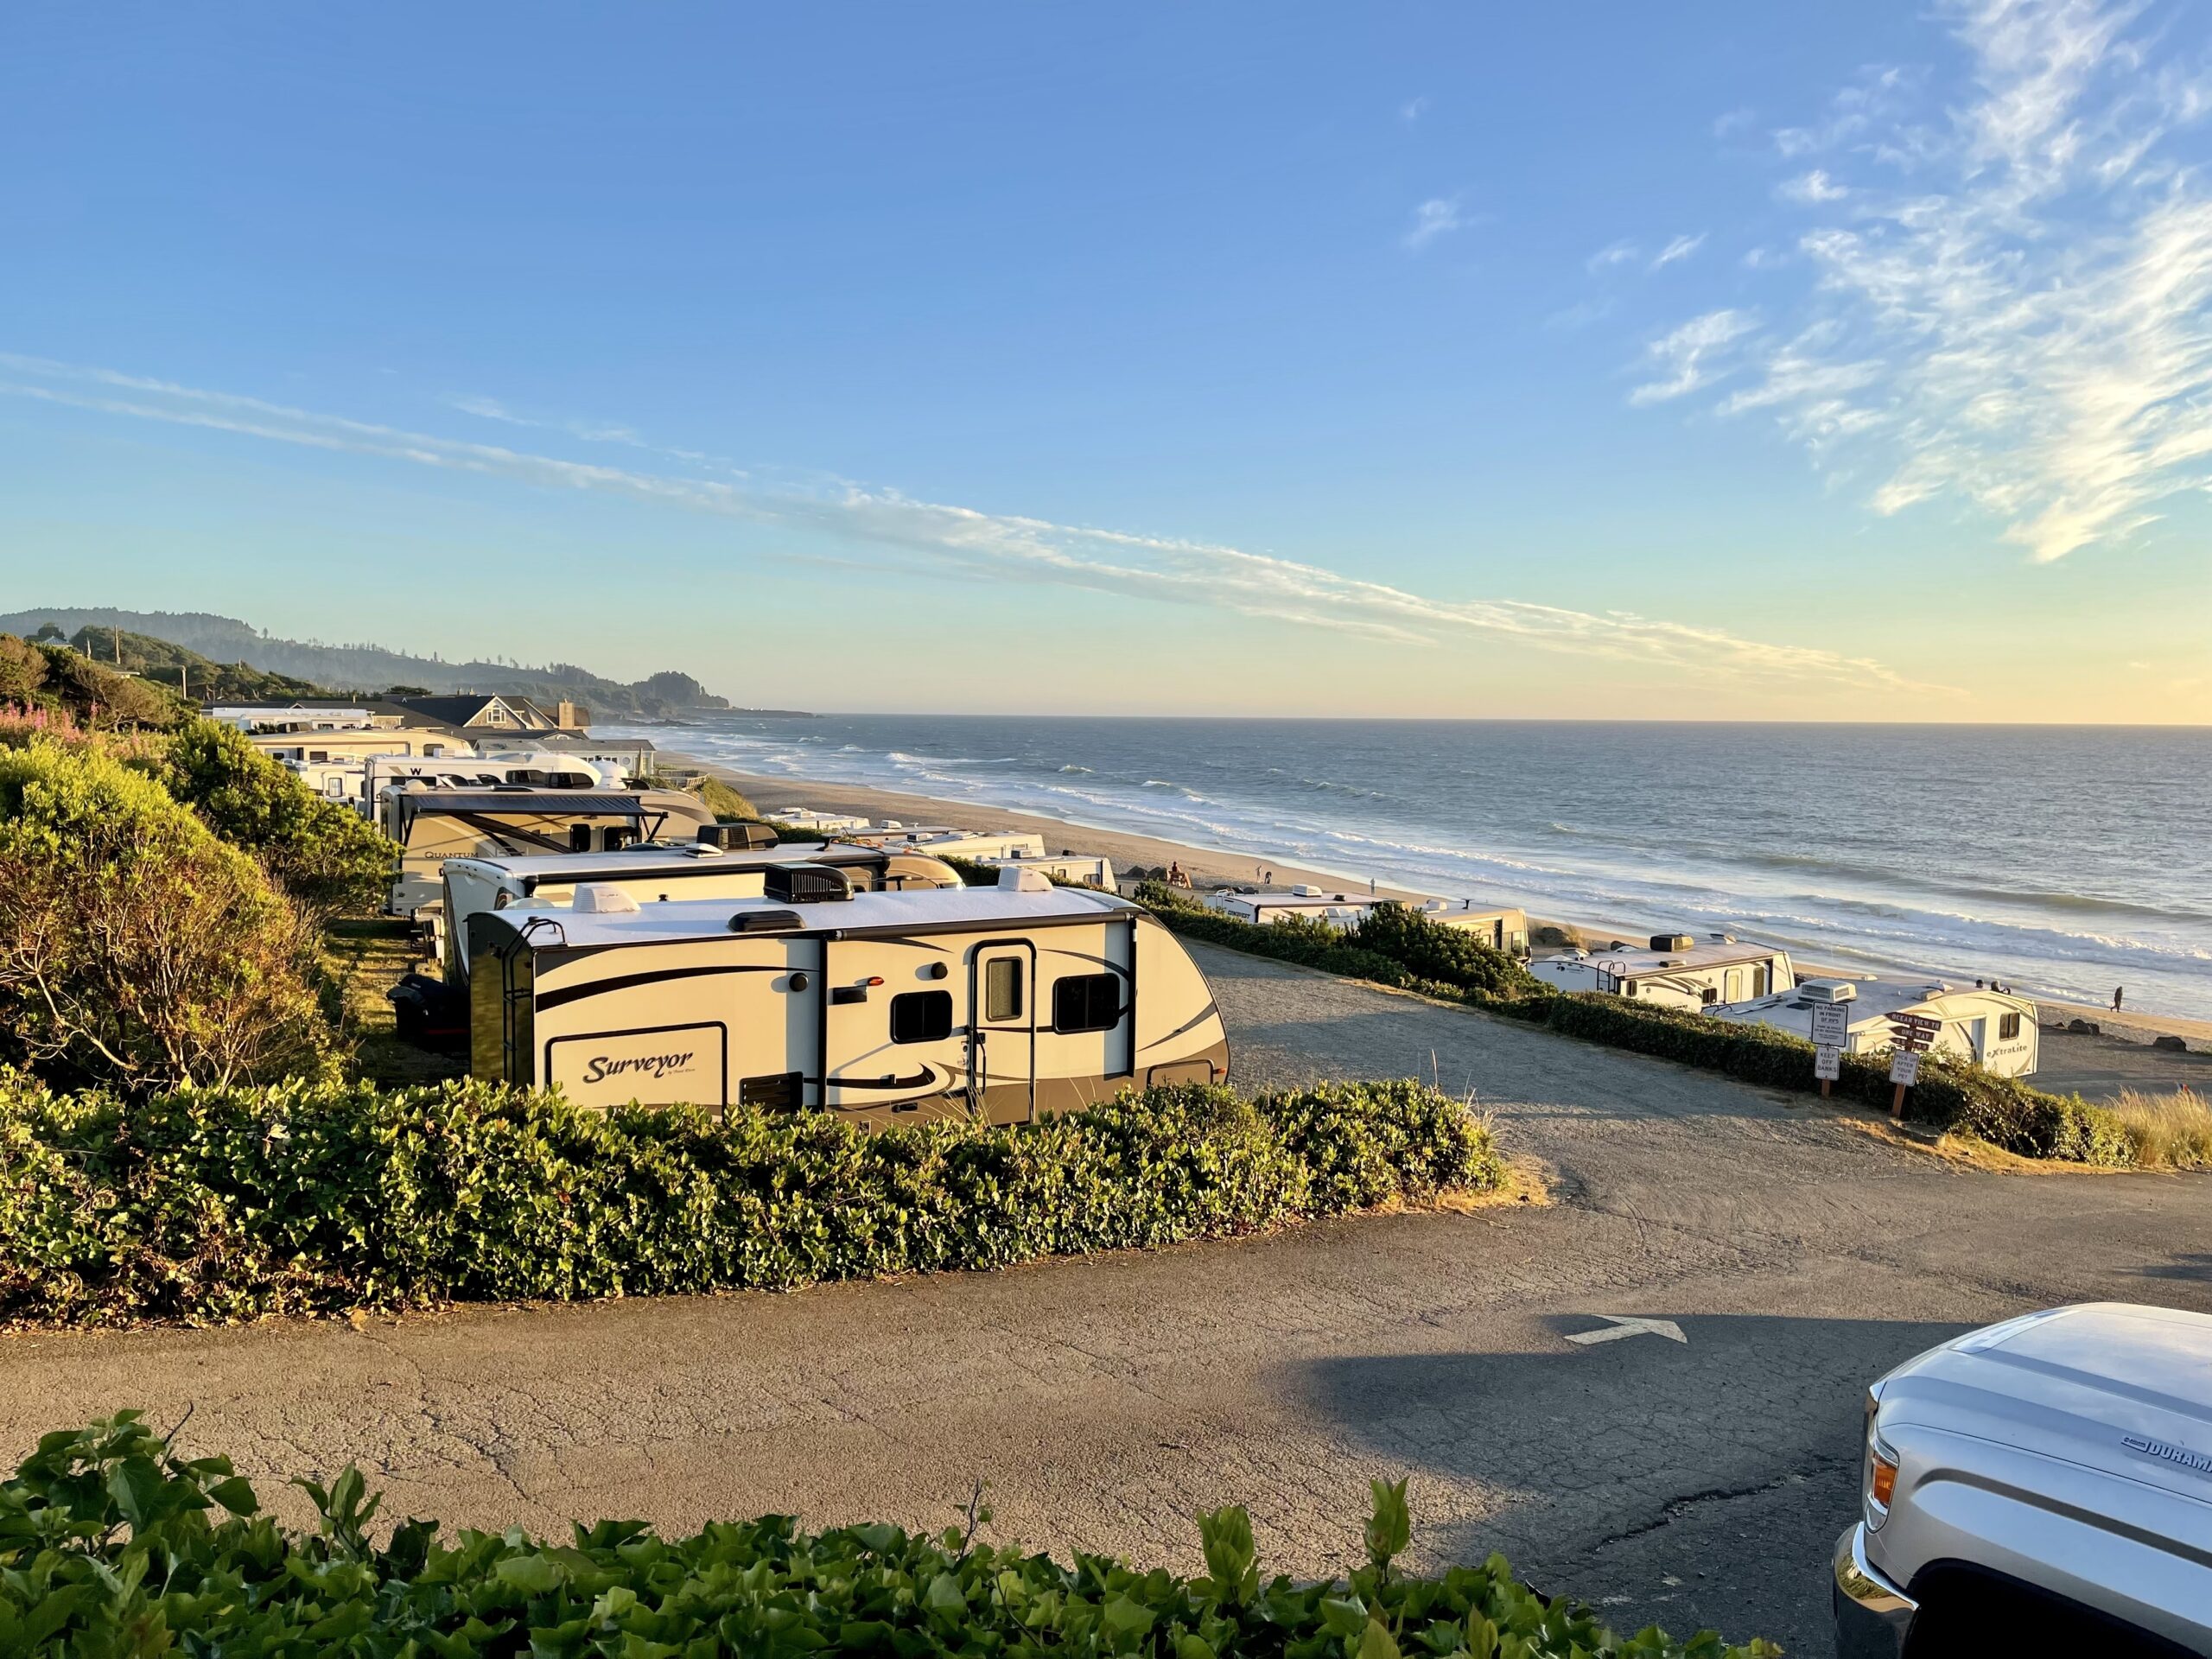 an RV park near the coast with rows of rvs parked near the shore under a blue sky